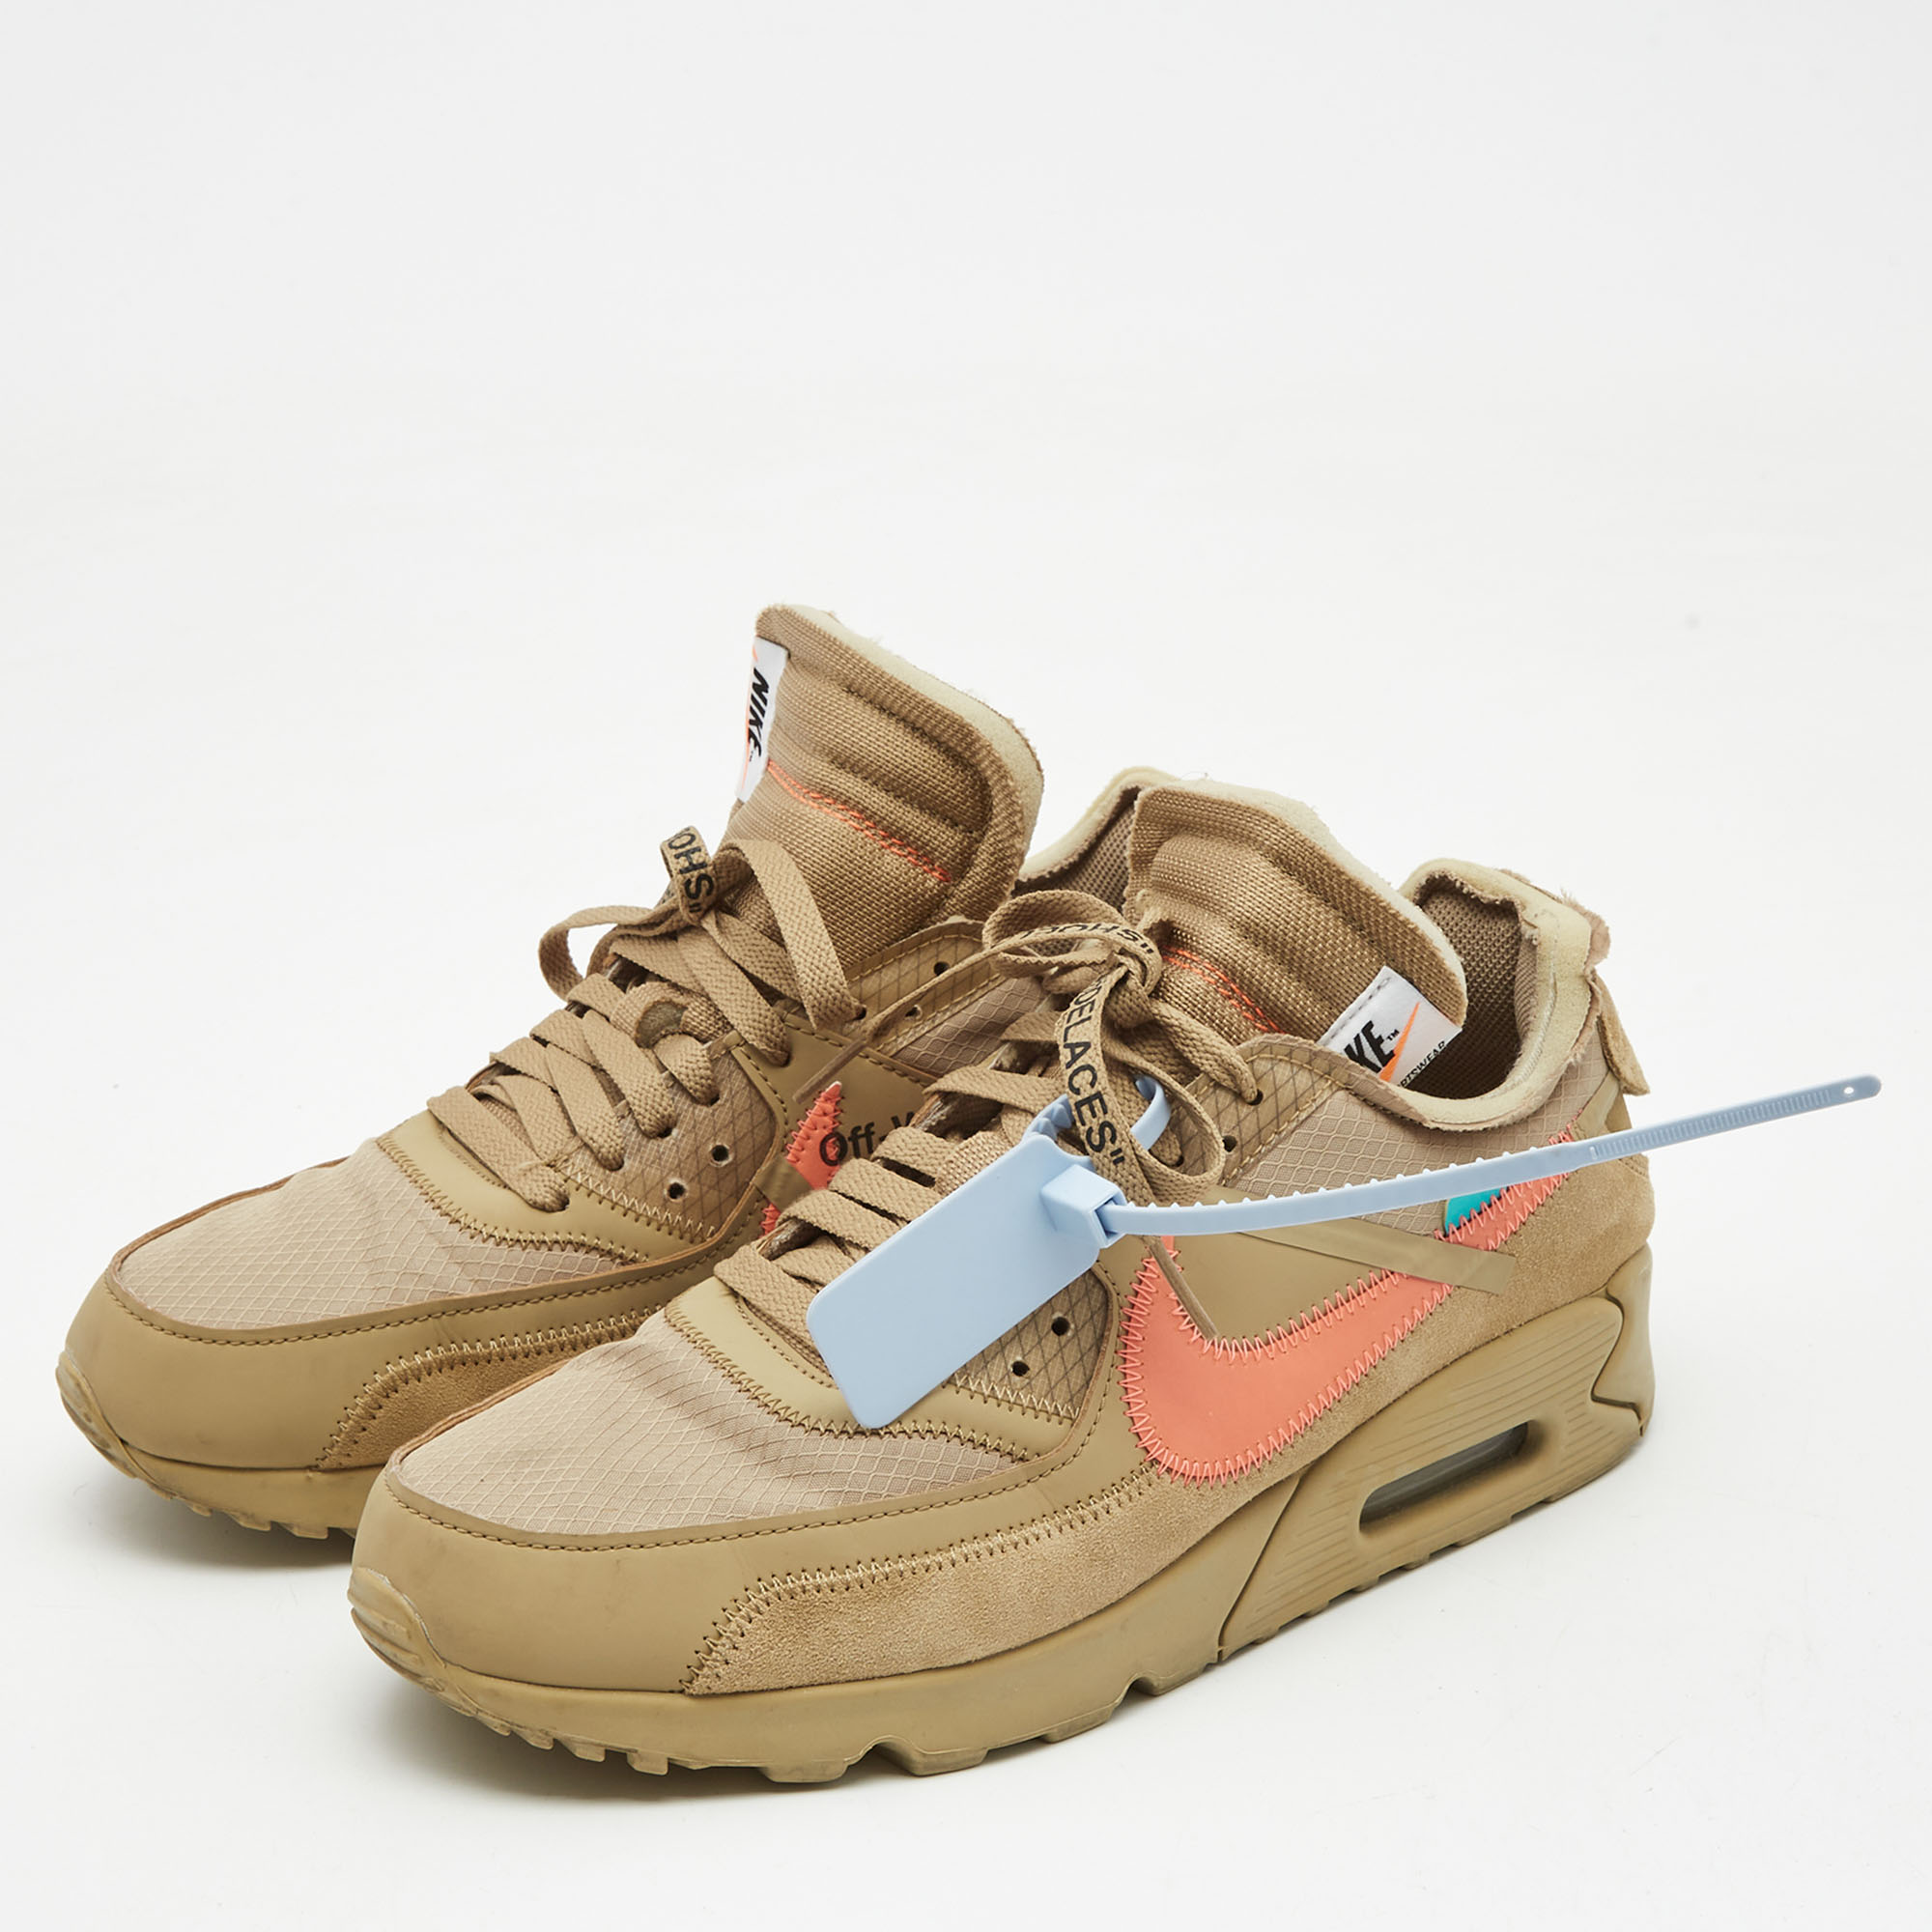 

Off-White x Nike Beige Fabric and Suede Air Max 90 Desert Ore Sneakers Size